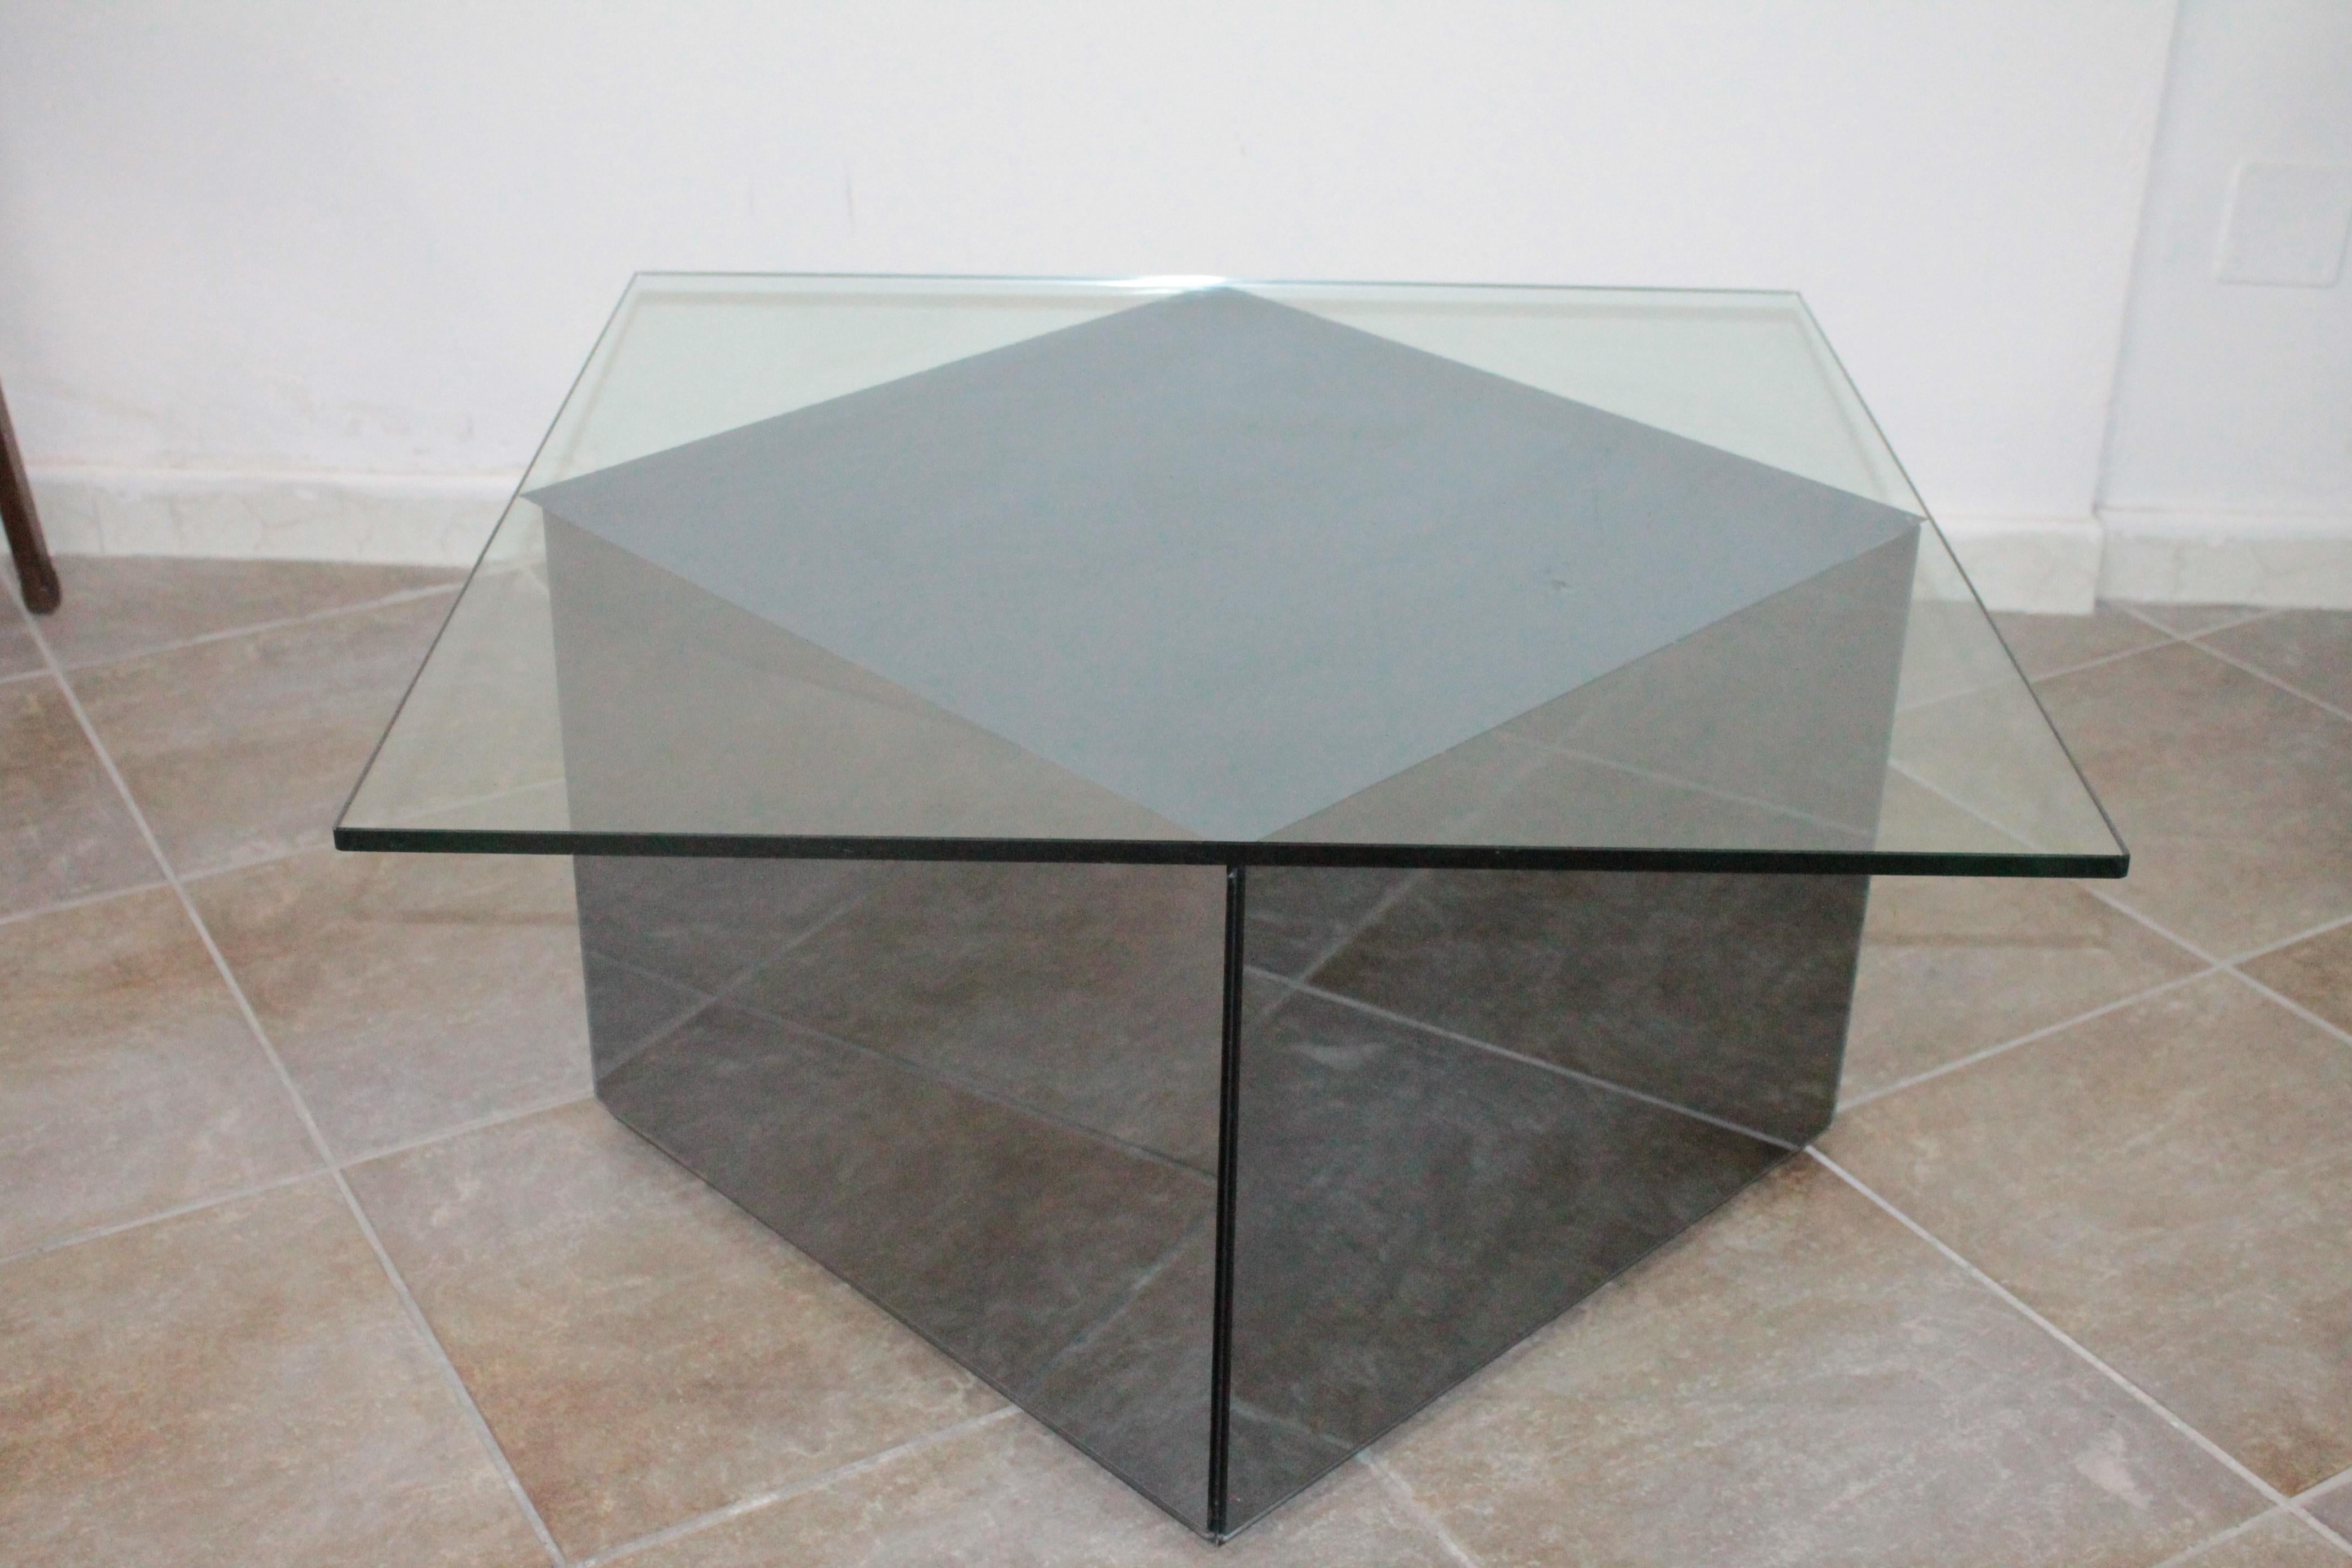 Nanda Vigo design coffee table with mirrored glass base and glass top.
Very good condition.